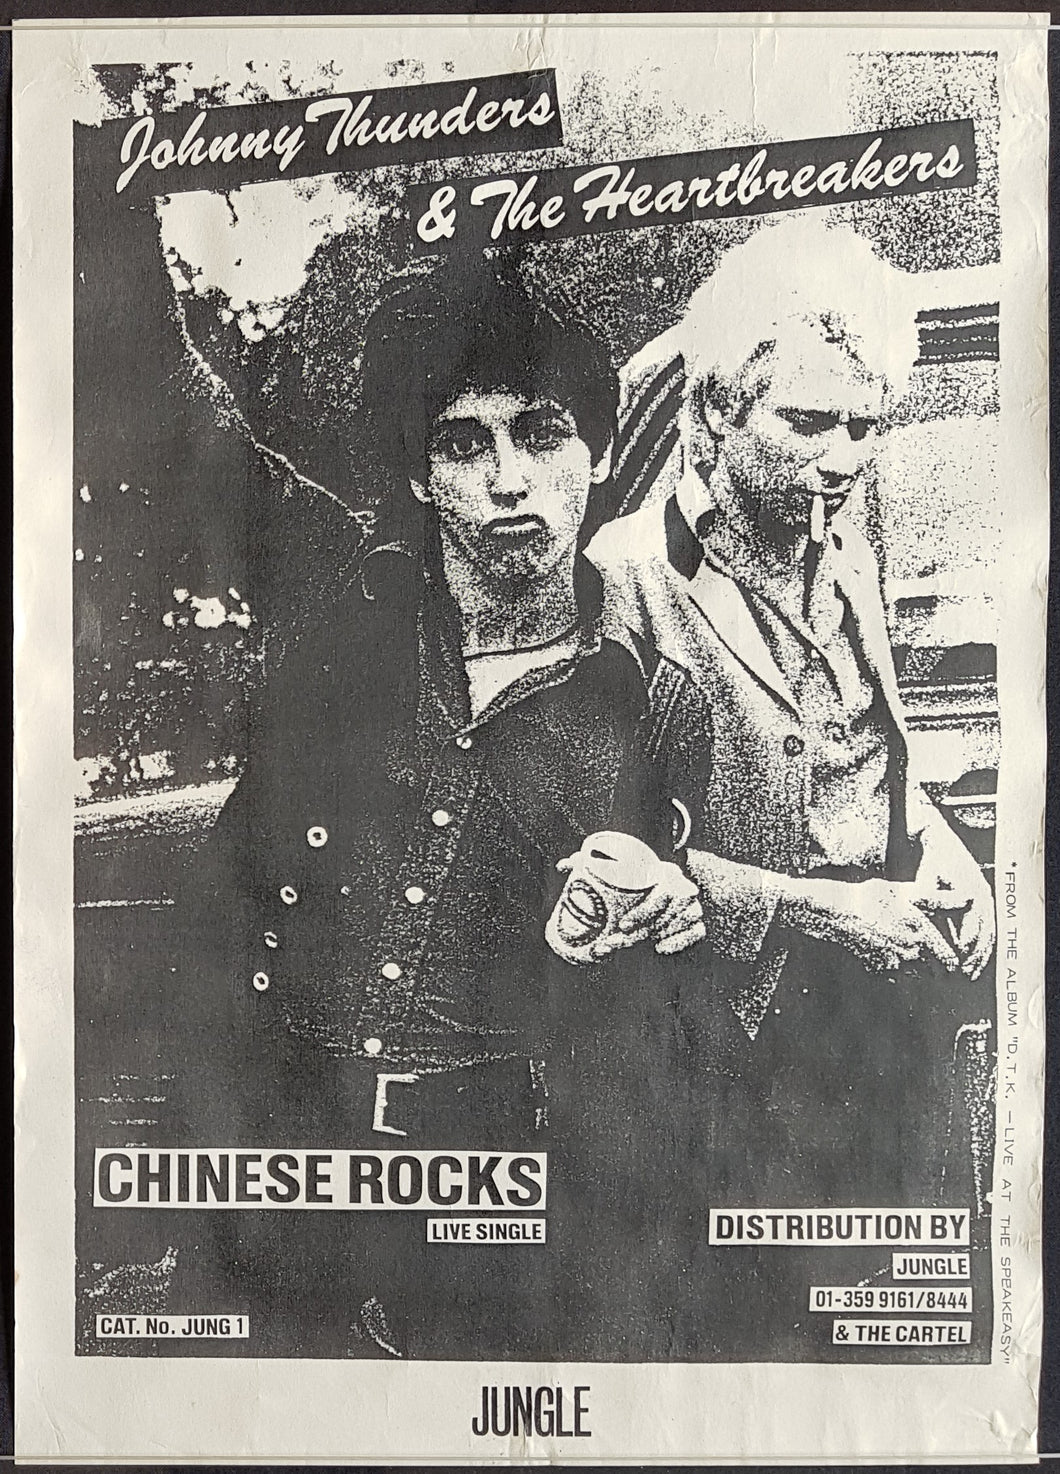 Johnny Thunders & The Heartbreakers - Chinese Rocks Live Single